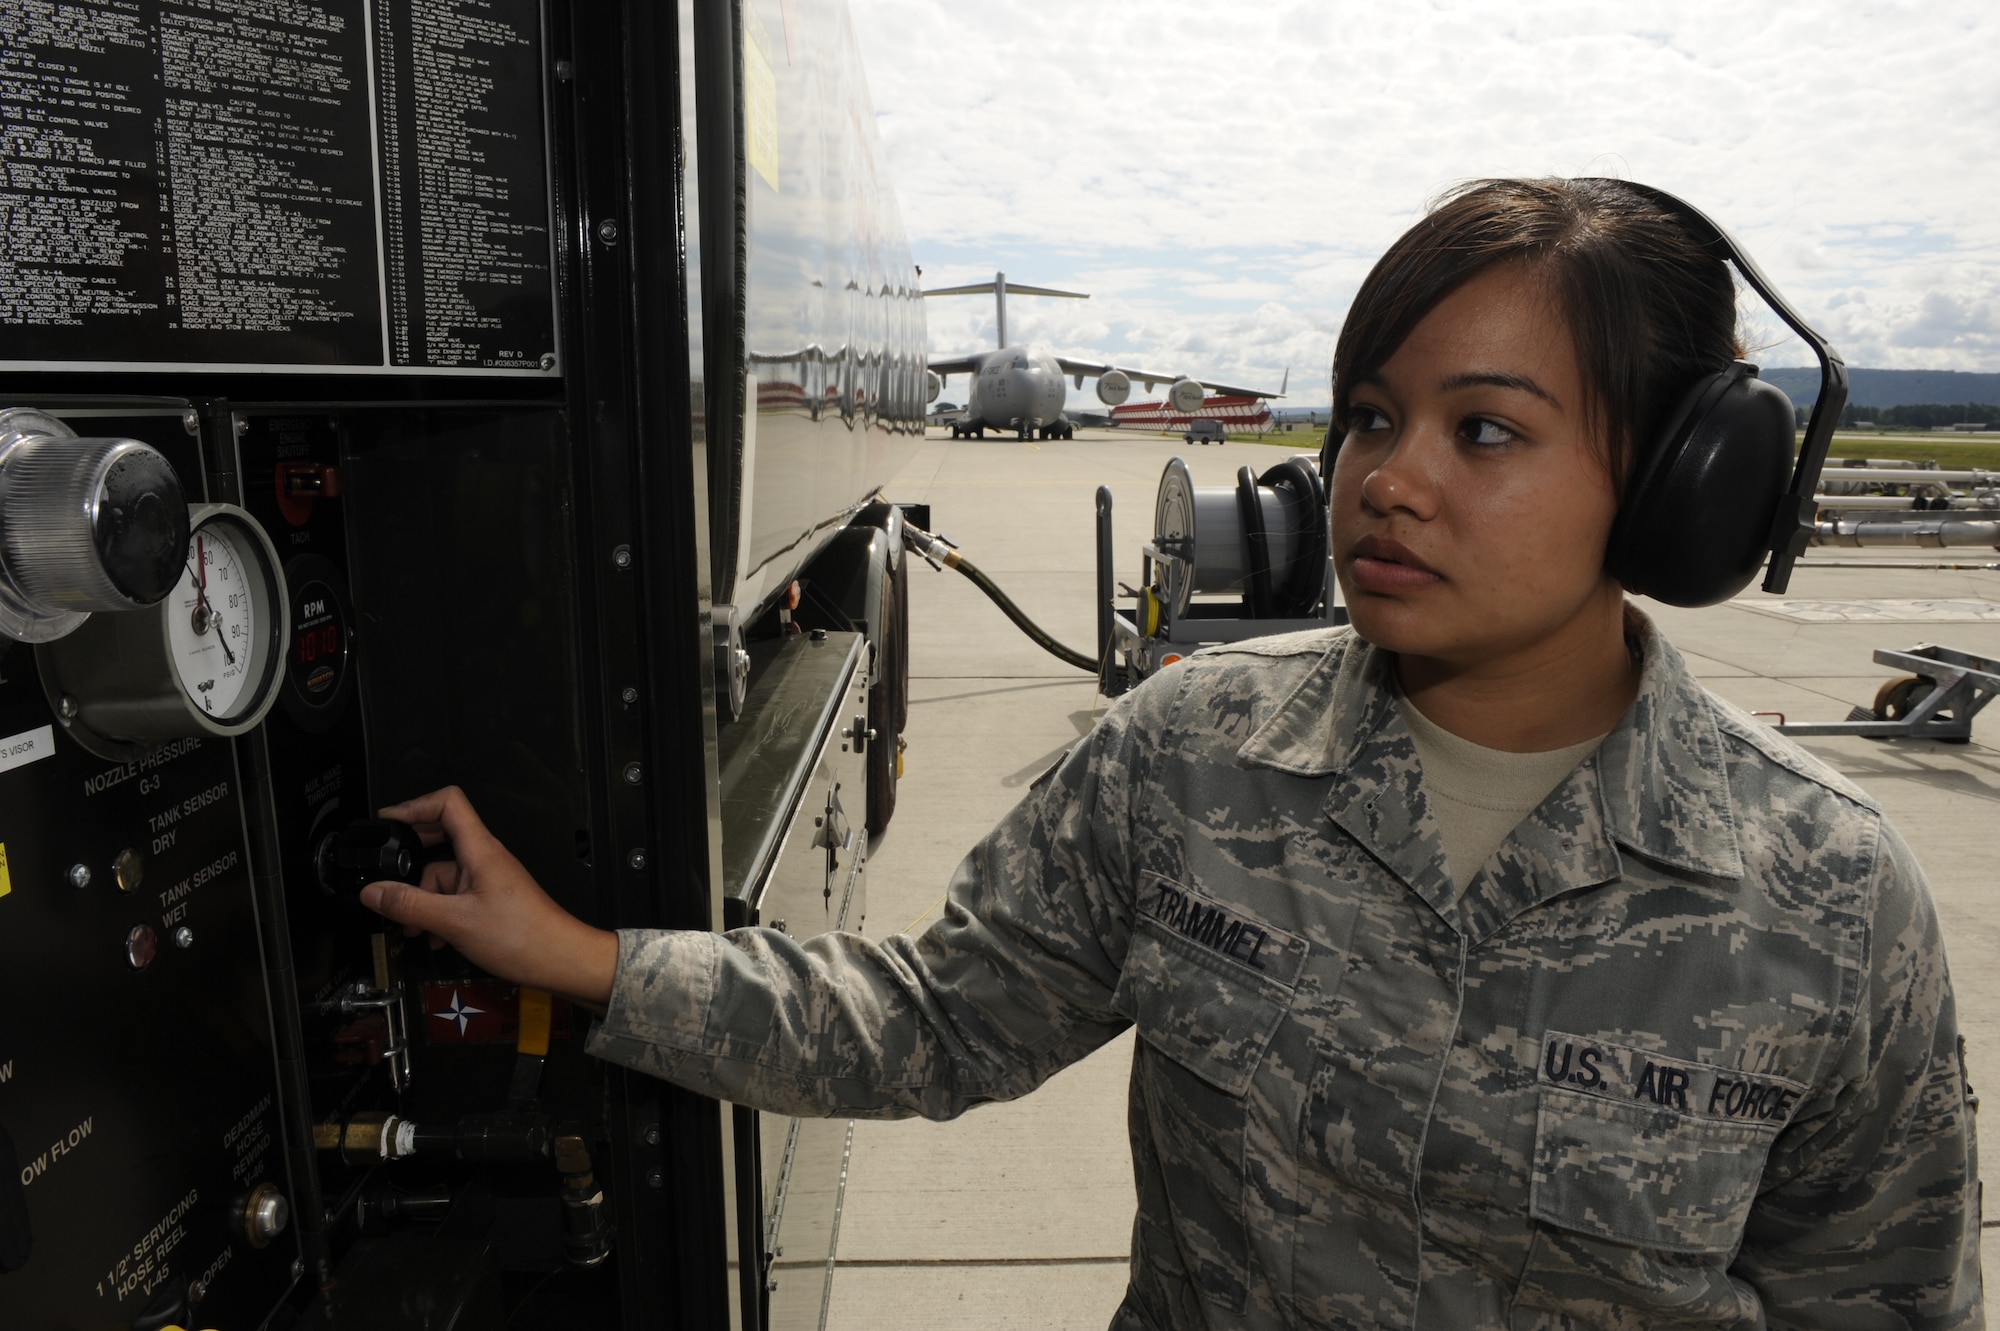 Senior Airman Janine Trammel, 86th Logistics Readiness Squadron fuels technician, checks a panel pressure display on Ramstein Air Base, Germany, July 10, 2012. Fuels help support this mission by continuously providing quality grade jet fuel. (U.S. Air Force photo/ Senior Airman Aaron-Forrest Wainwright)